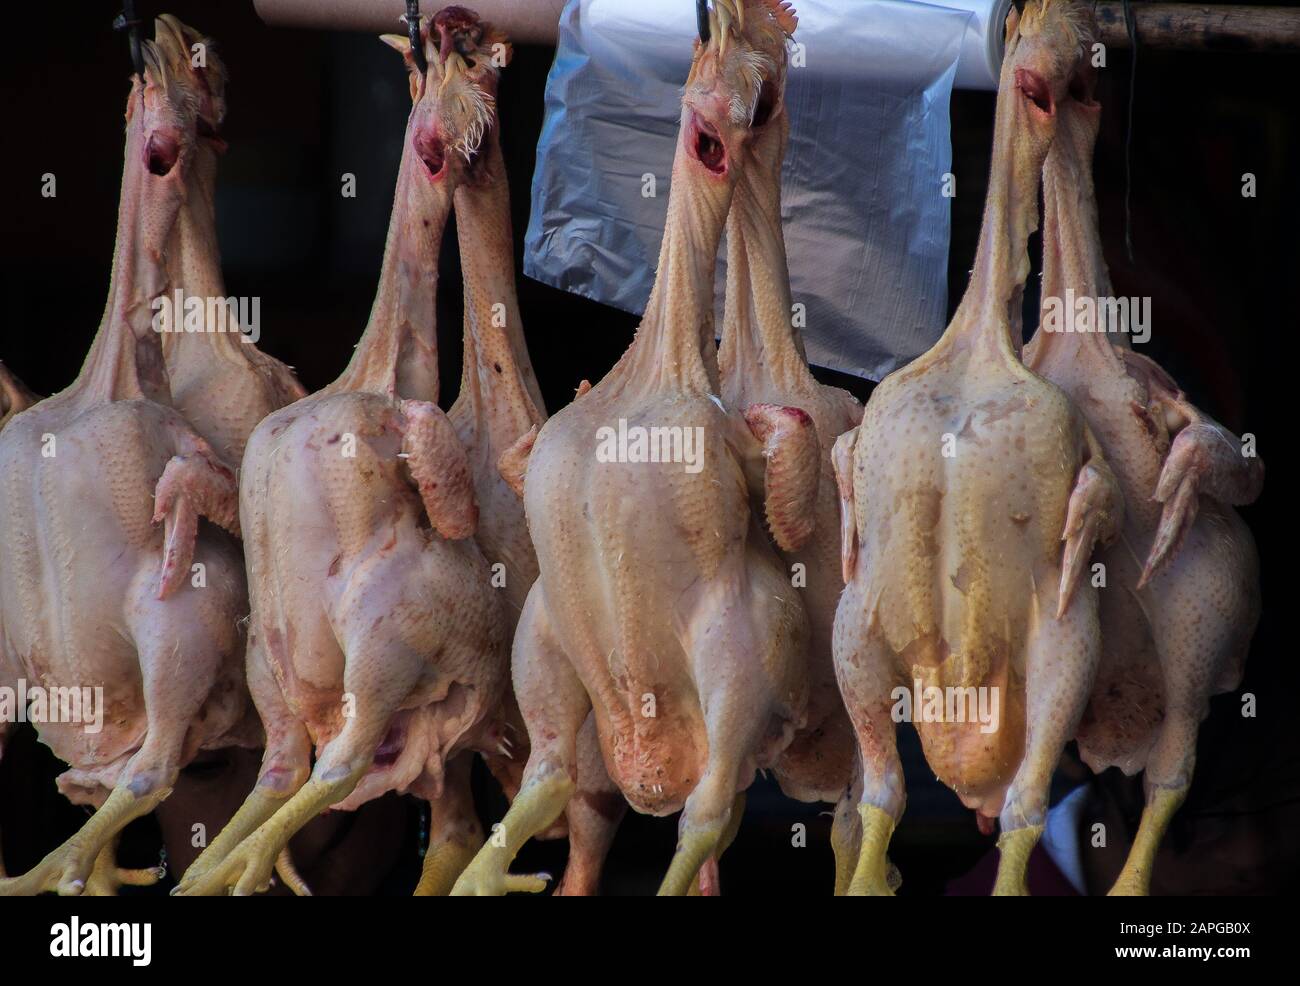 Premium Photo  Chicken hanging from hooks in a meat factory